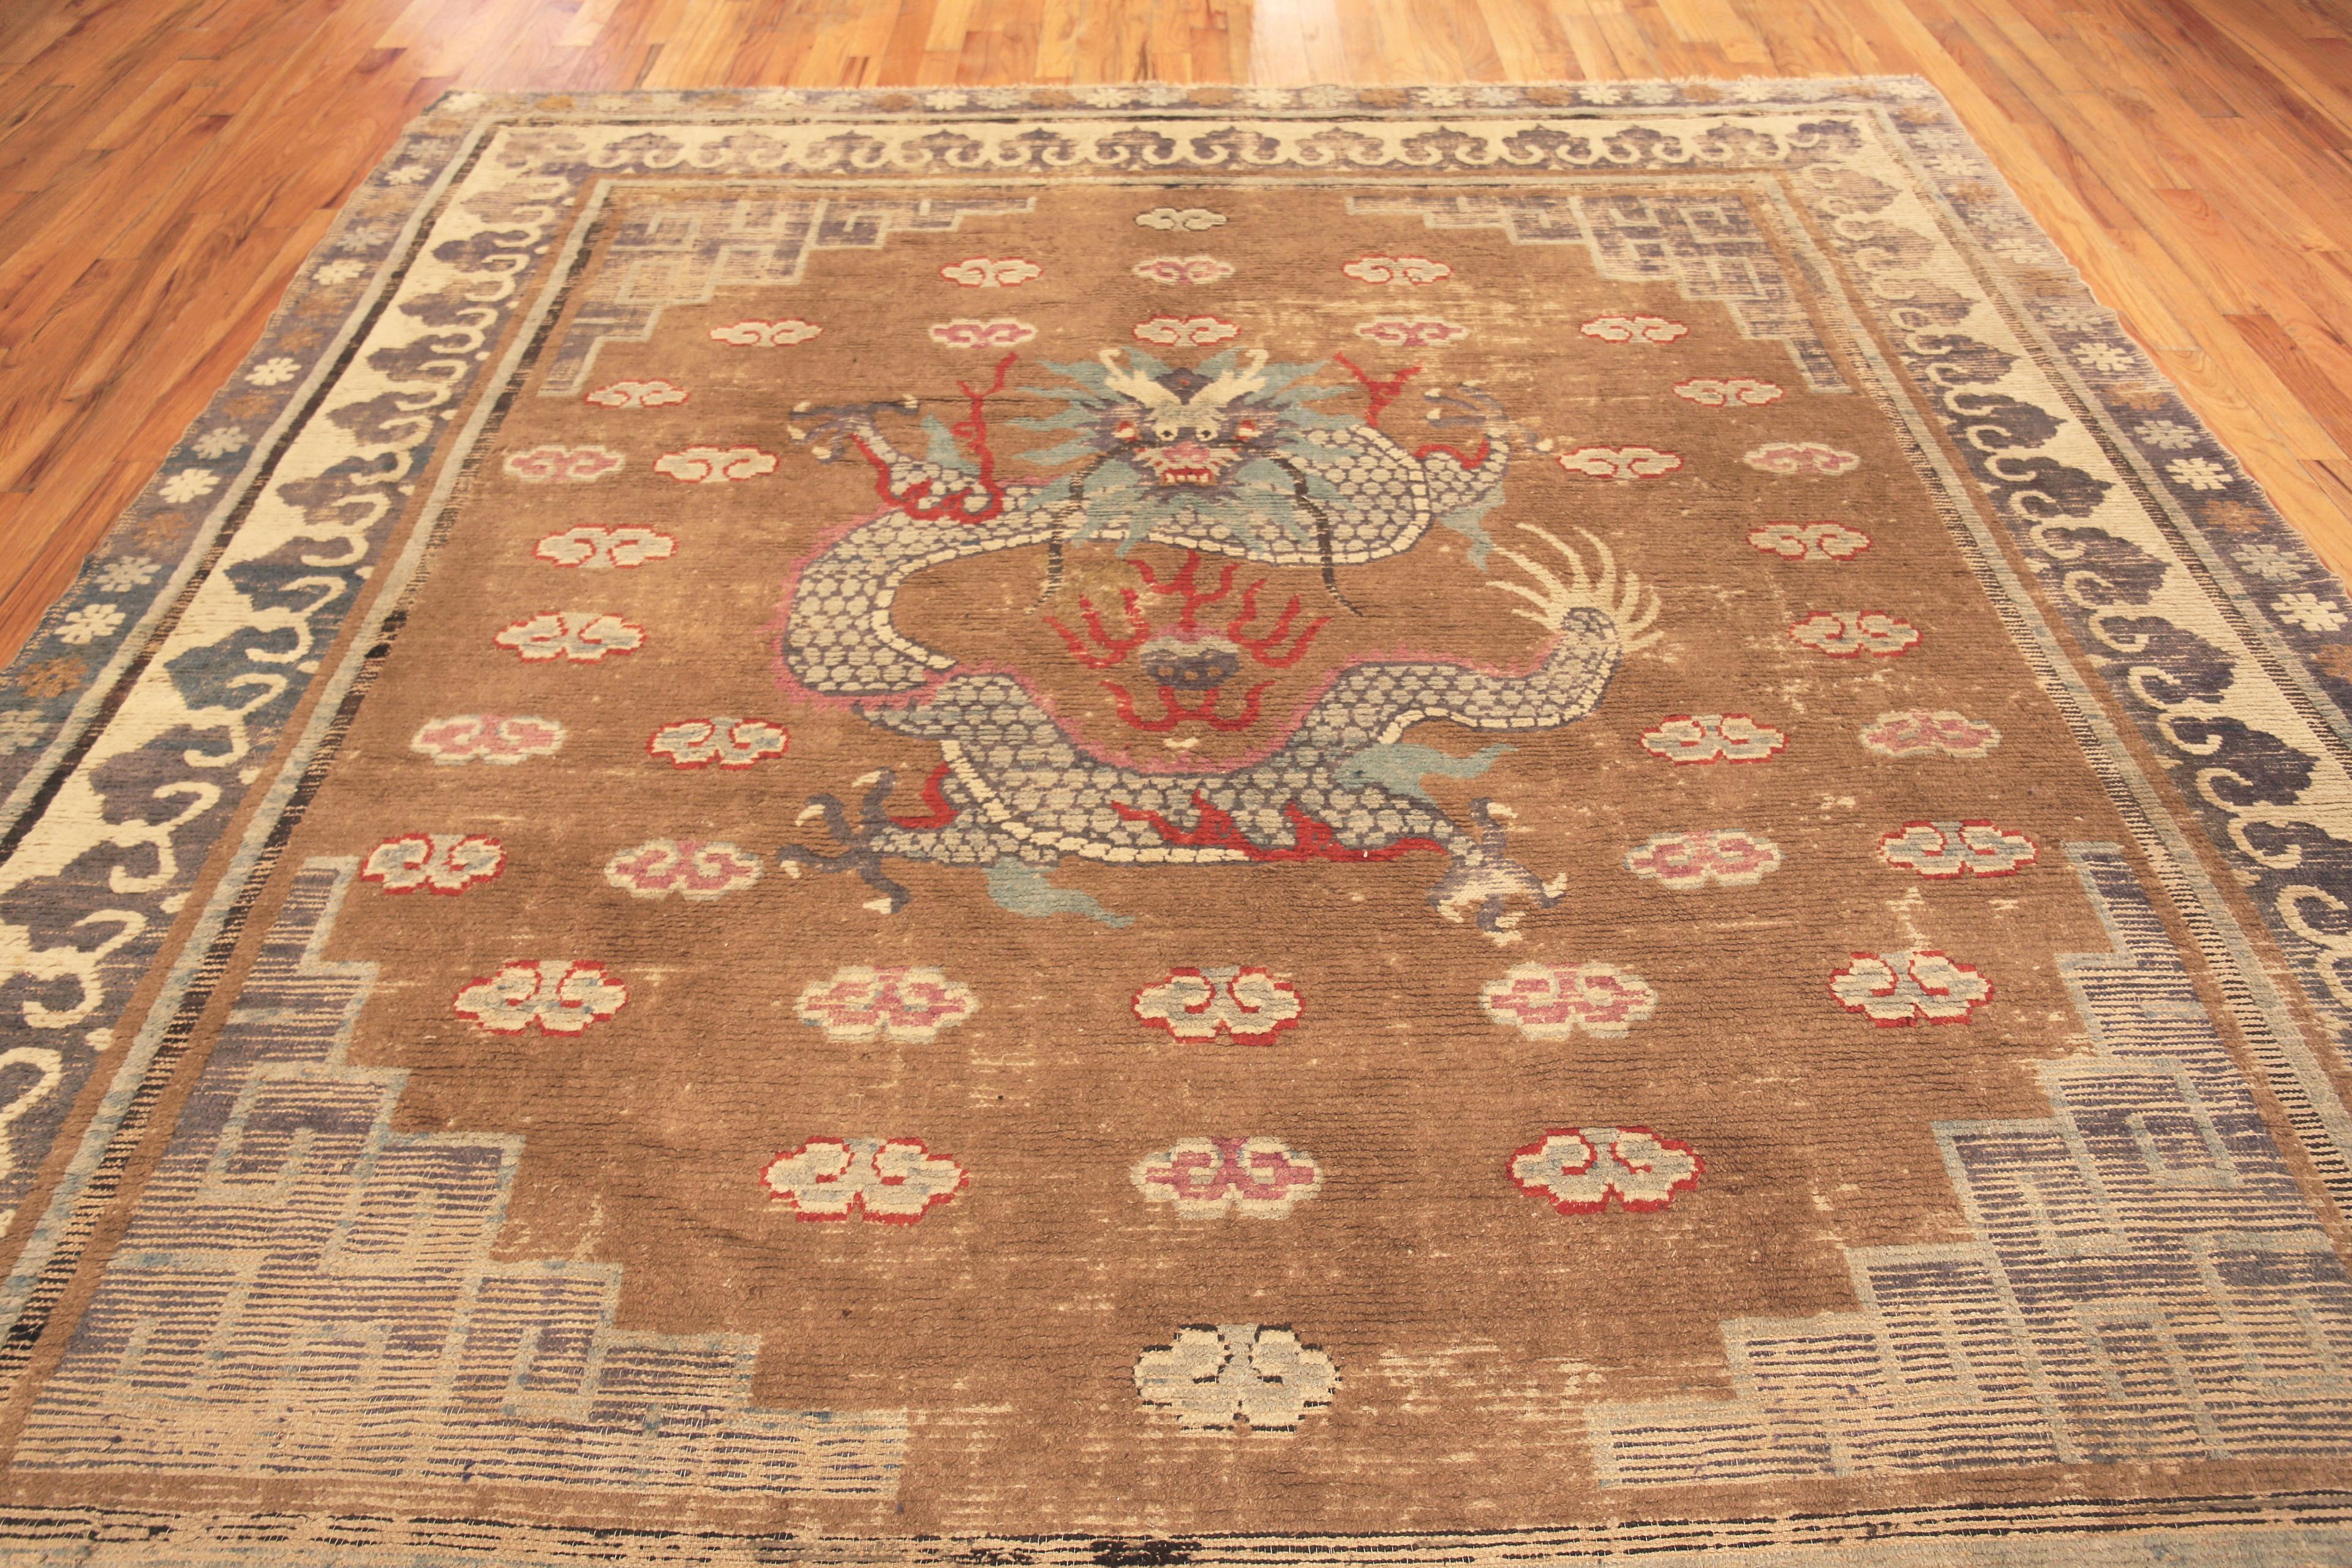 Antique Dragon Design Mongolian Rug, Country of Origin: Mongolia, Circa date: 1880. Size: 10 ft 3 in x 11 ft (3.12 m x 3.35 m)
 